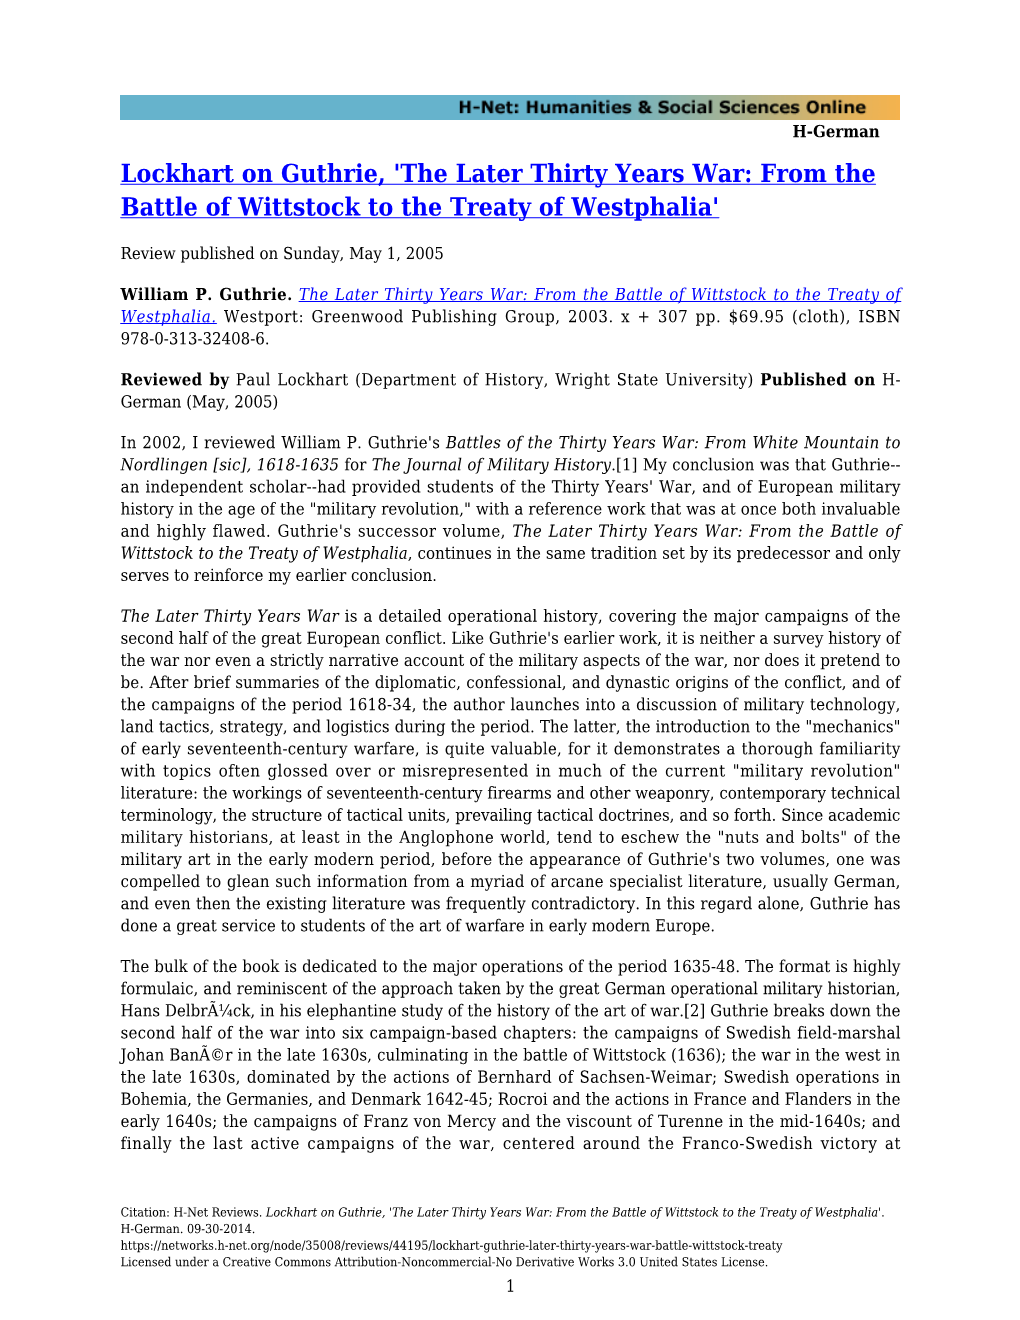 Lockhart on Guthrie, 'The Later Thirty Years War: from the Battle of Wittstock to the Treaty of Westphalia'